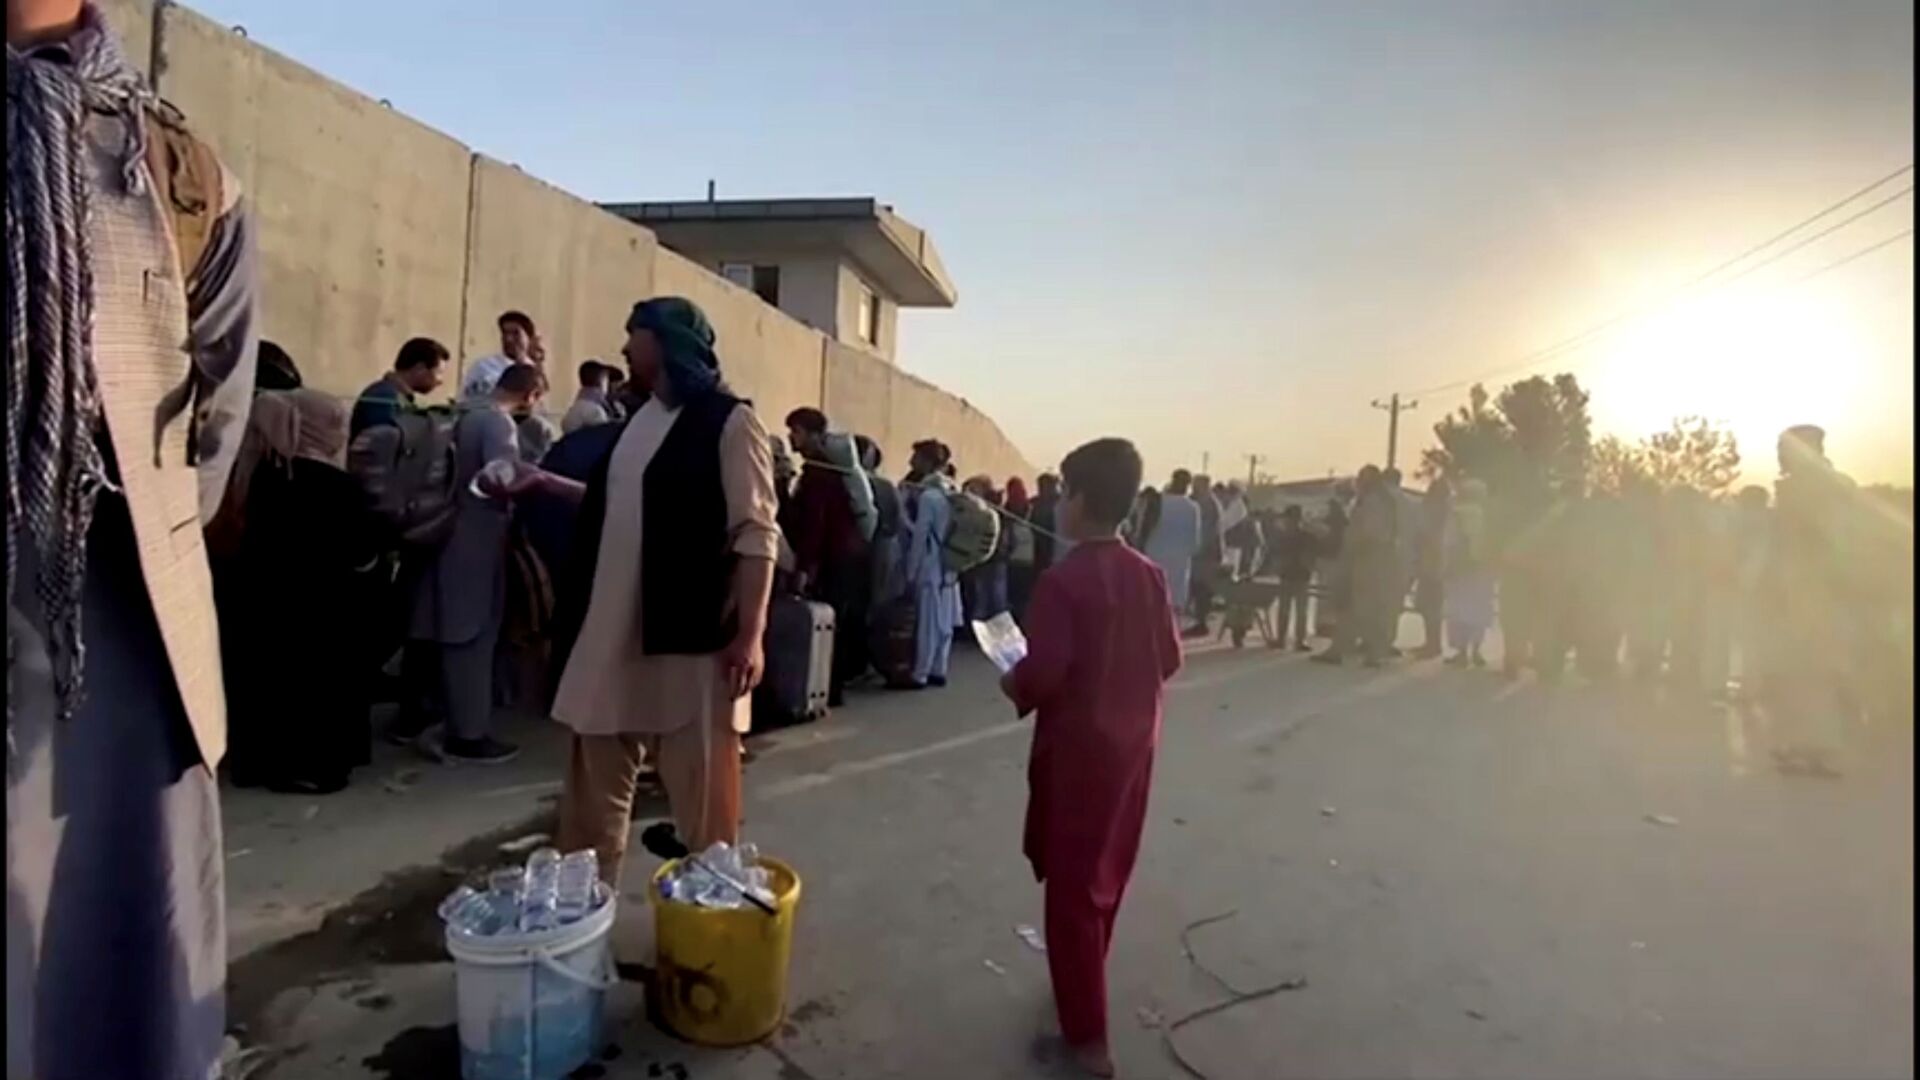 A man instructs people to queue as they stand with their belongings outside Kabul airport, Afghanistan, August 22, 2021 in this still image taken from video - Sputnik International, 1920, 07.09.2021